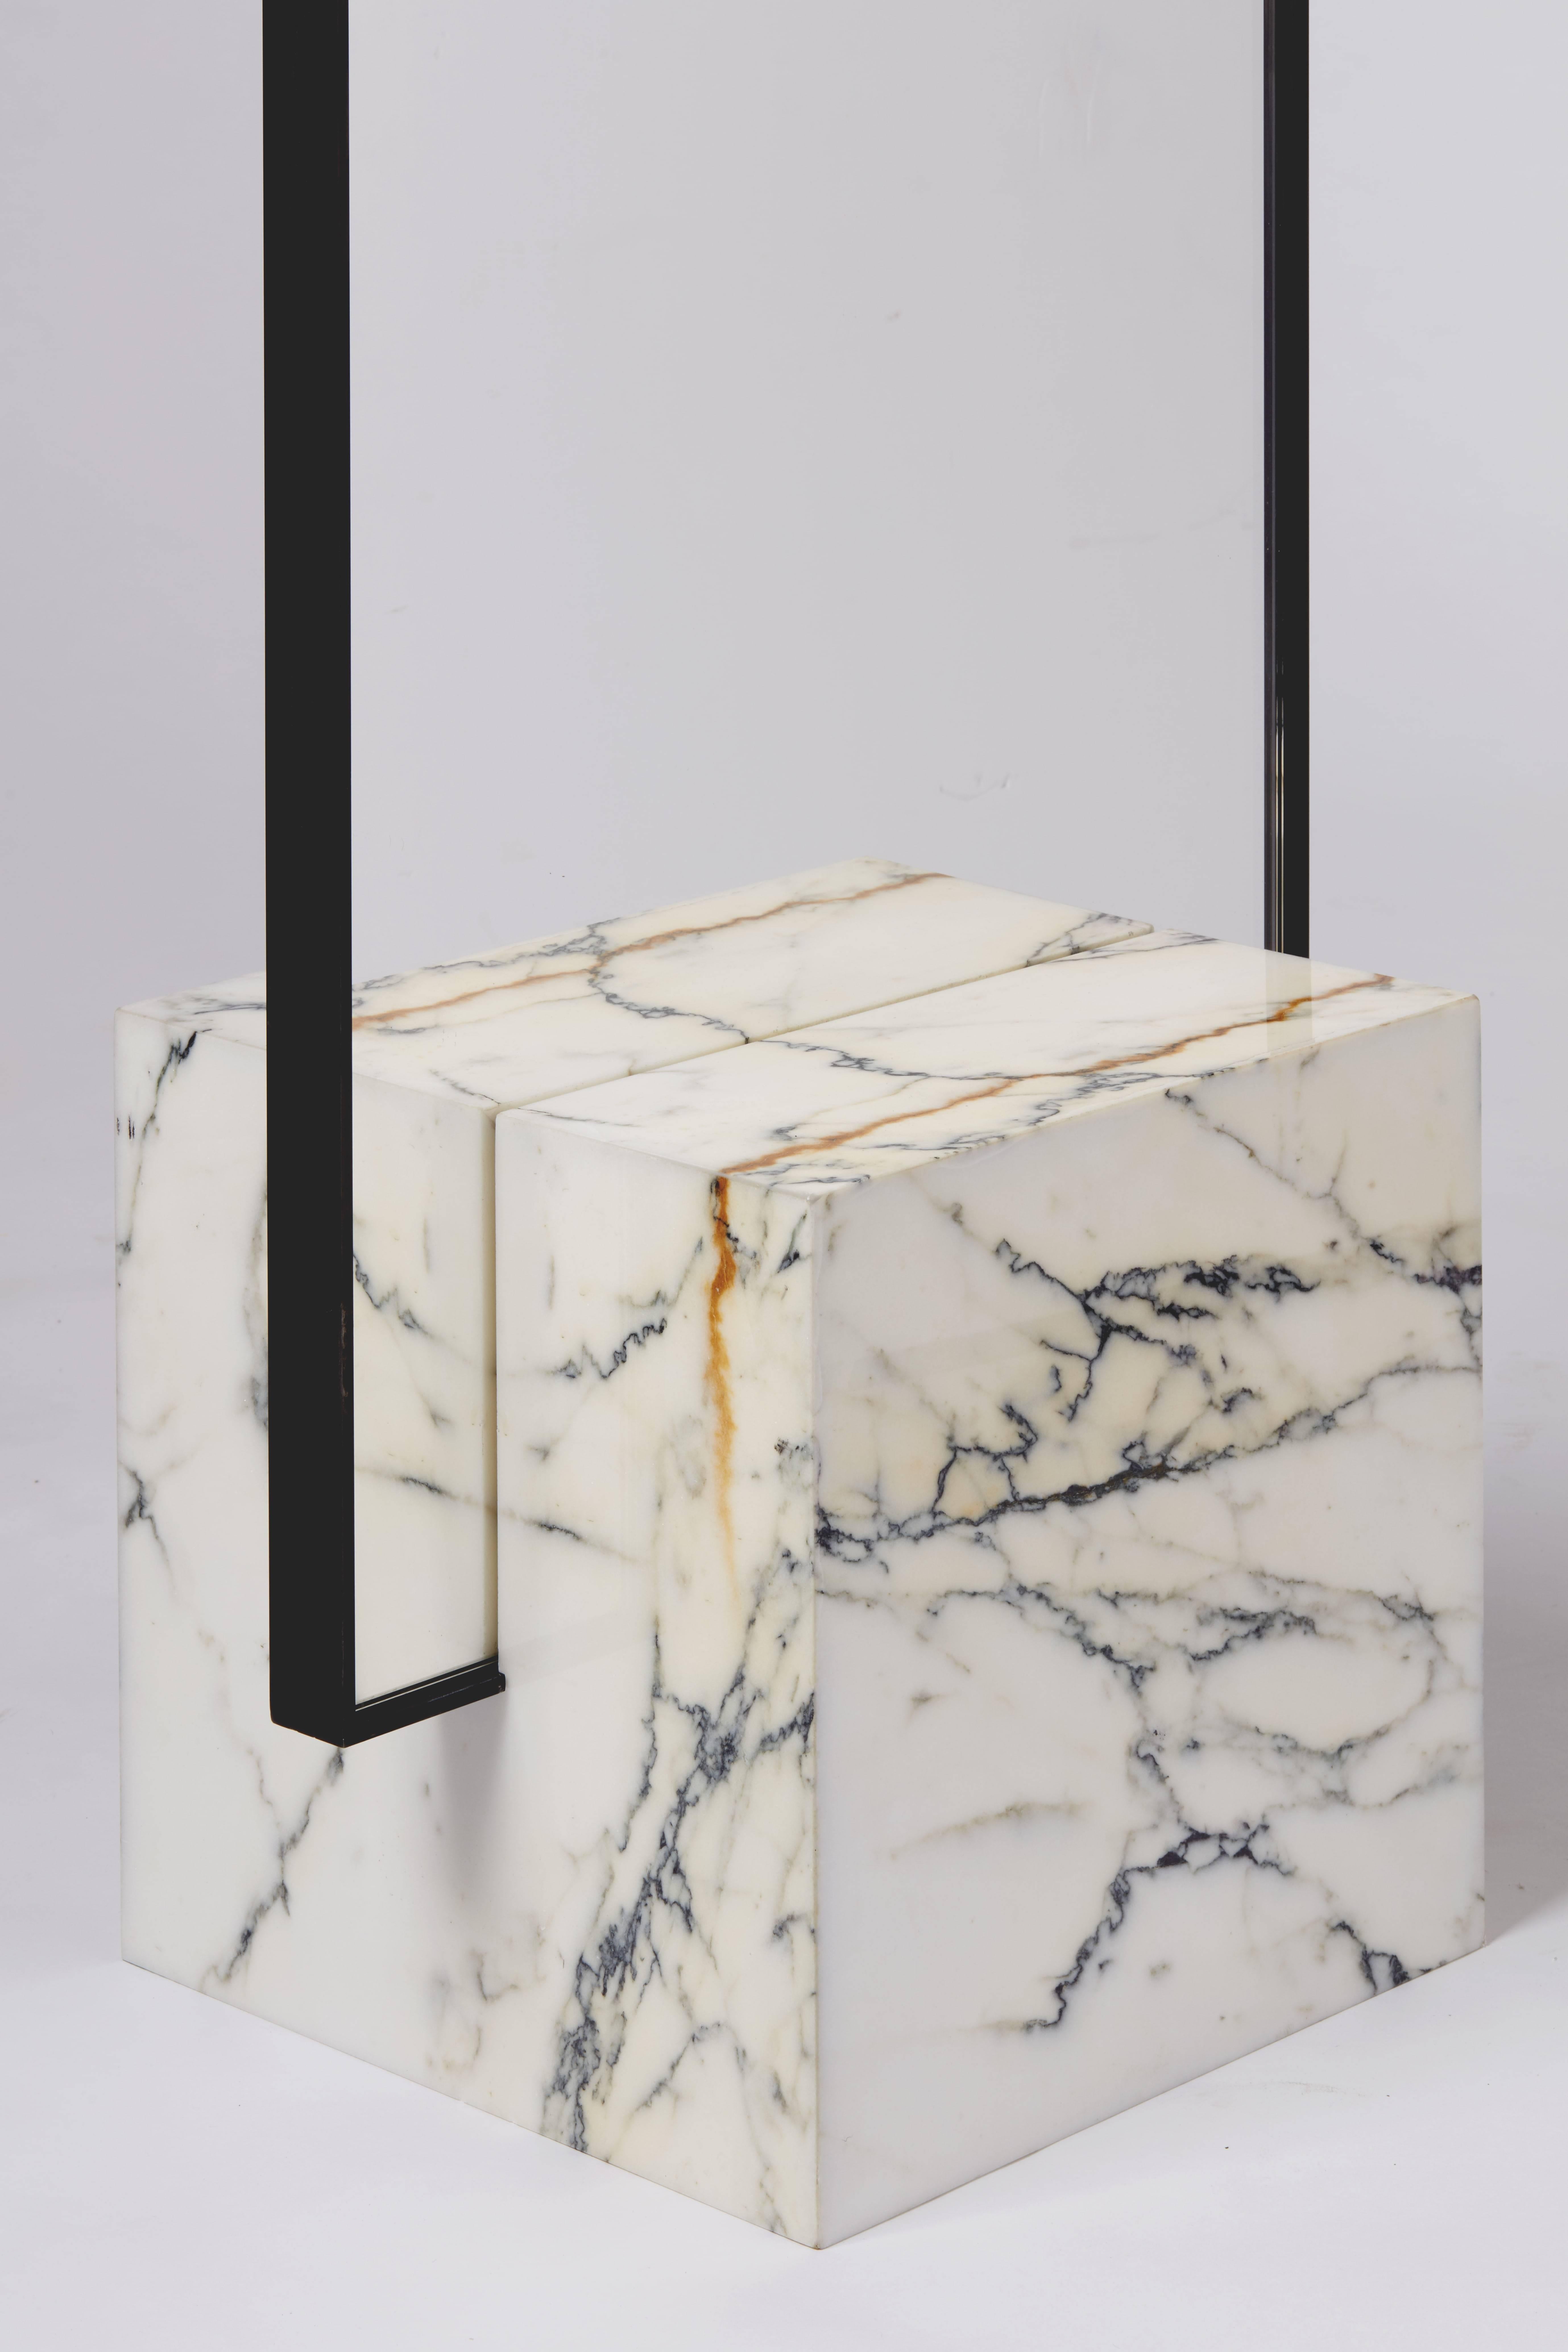 Coexist slash standing mirror with polished marble cube, concrete rubber and black steel mirror frame.

NYC Design 2018 Awards Winner.